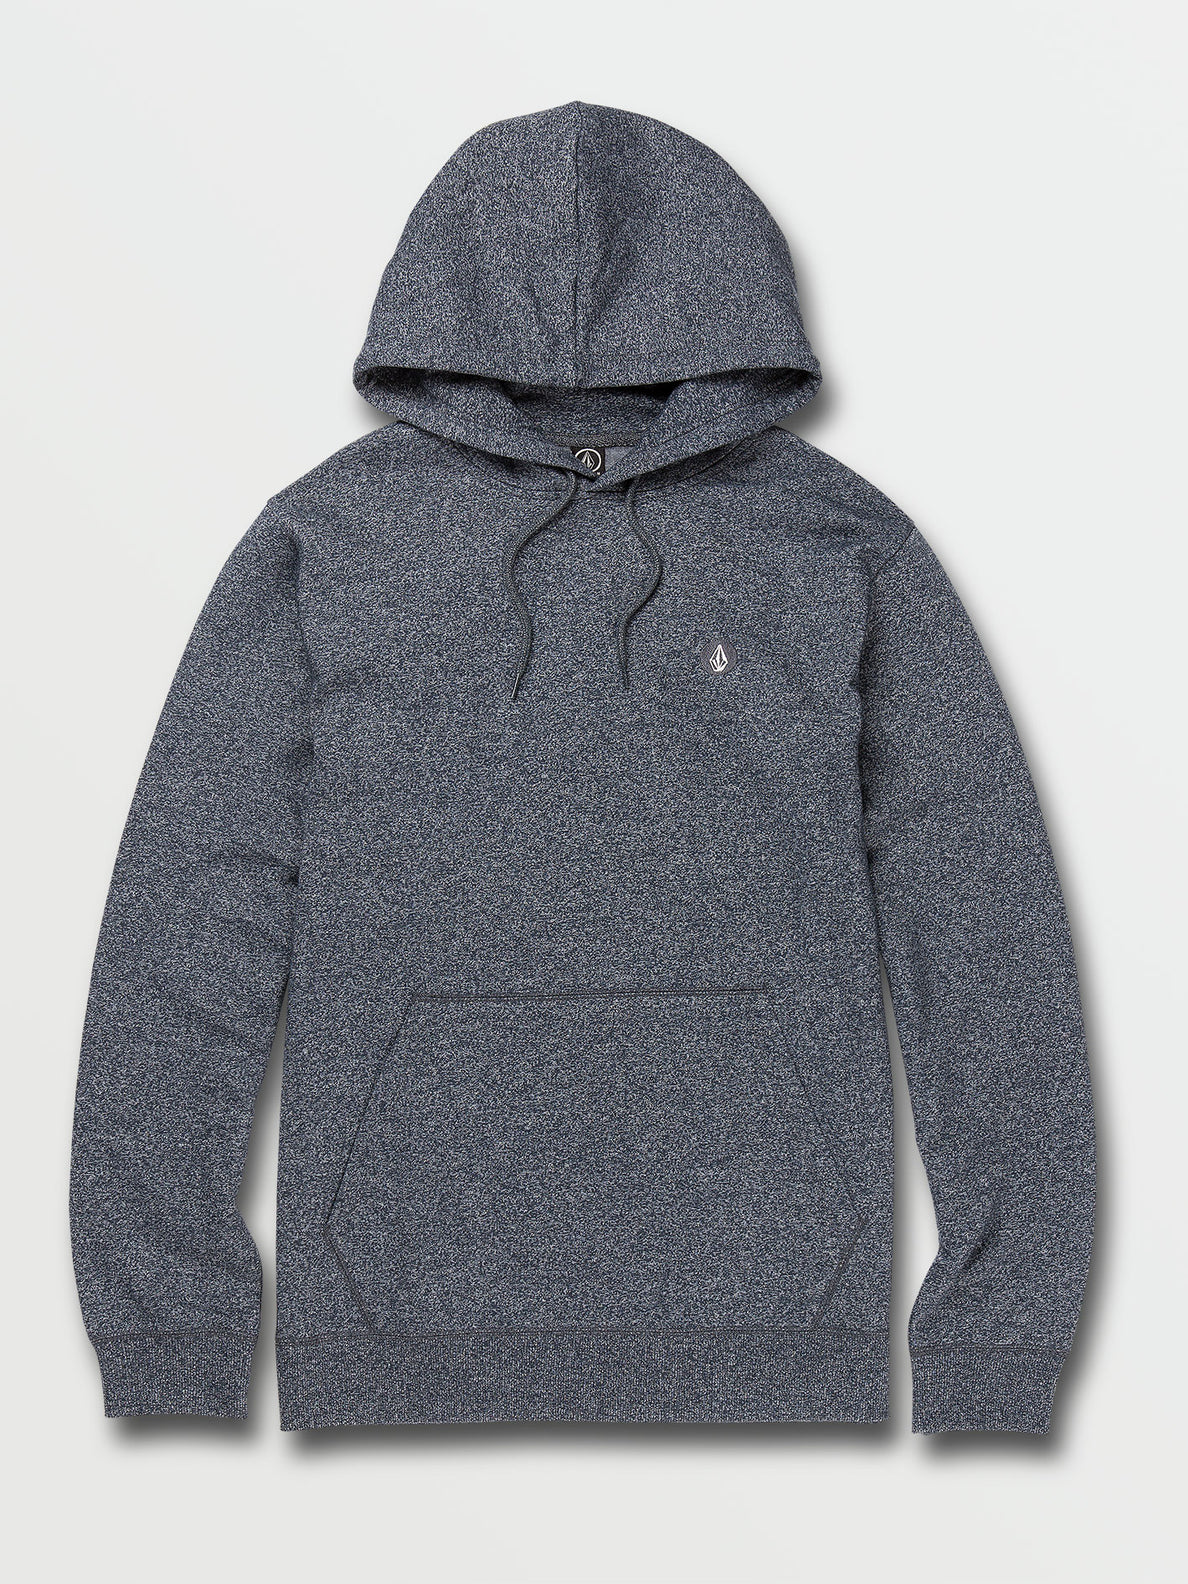 Foreman Static Pullover Fleece Hoodie - Faded Navy (A4102016_FDN) [F]